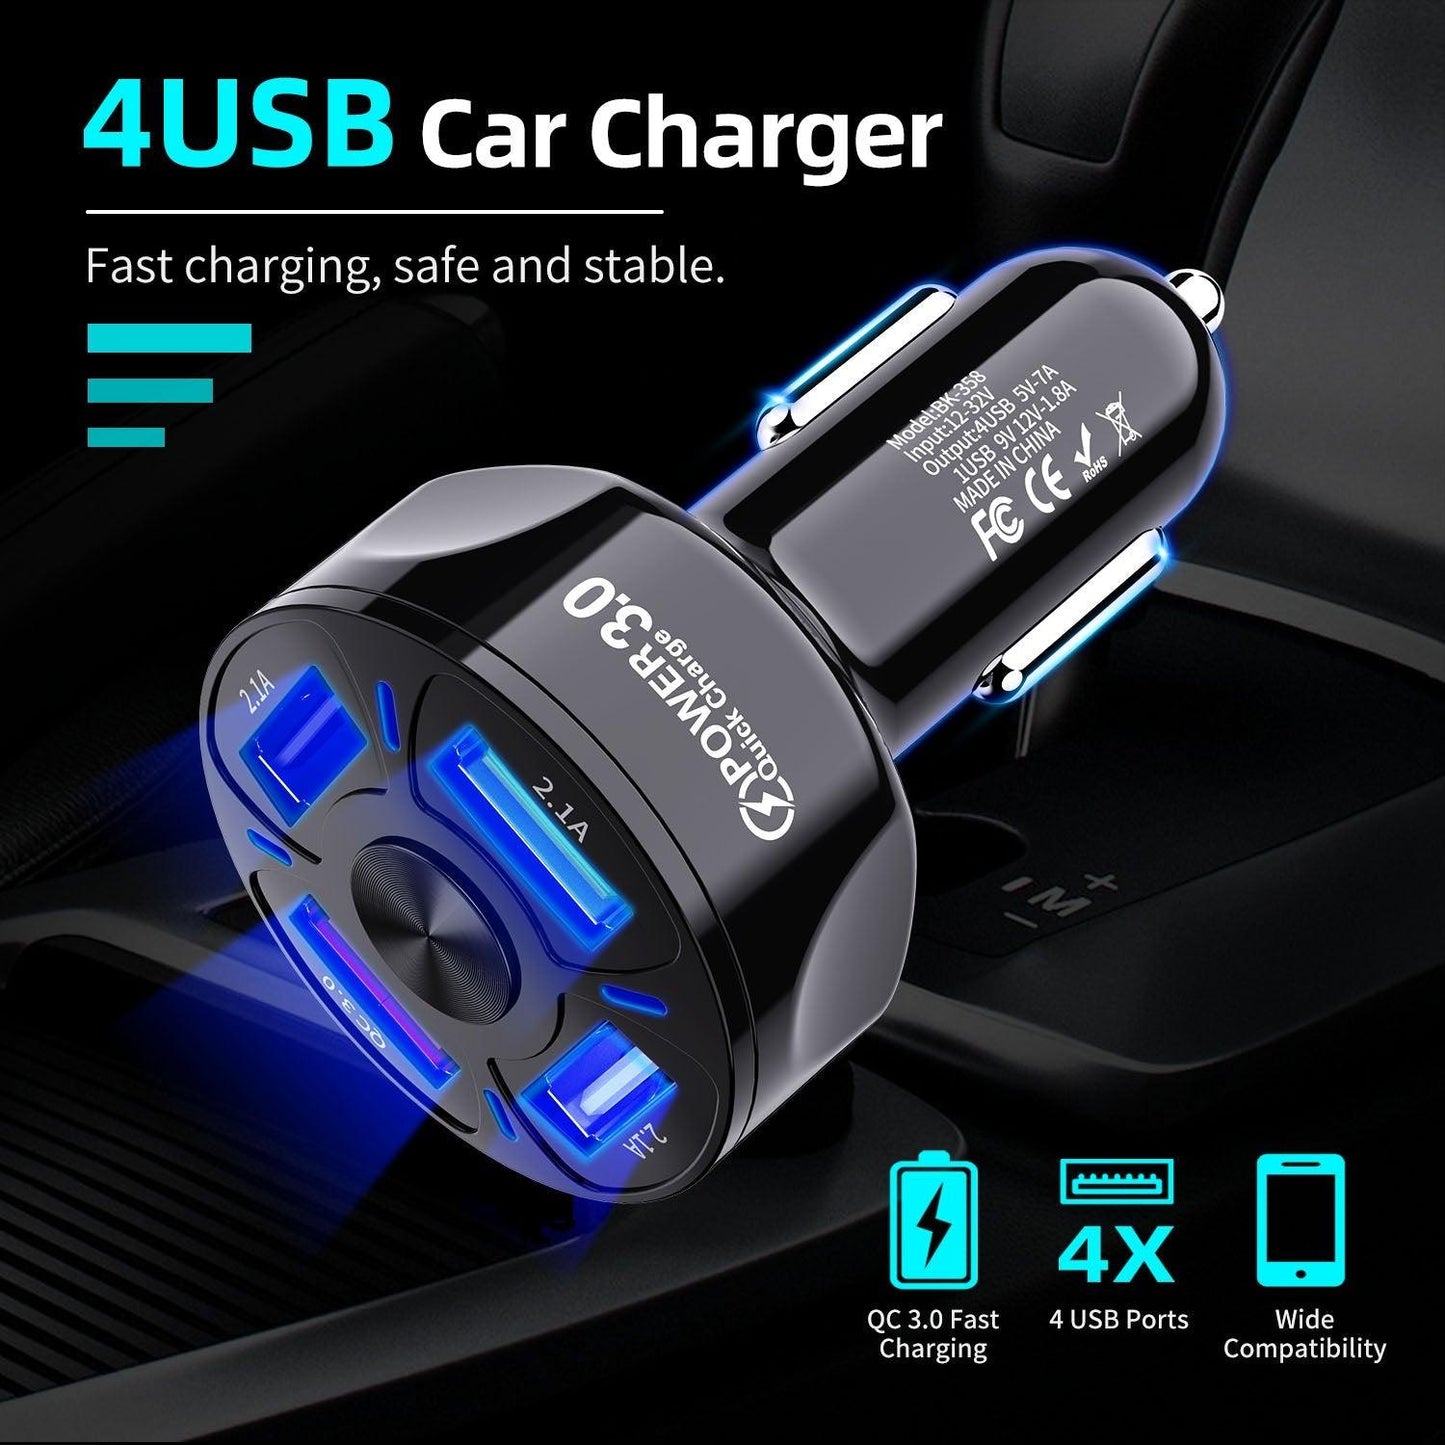 2 PACK PBG LED 4 Port Rapid Car Charger - Charges 4 Devices at once!